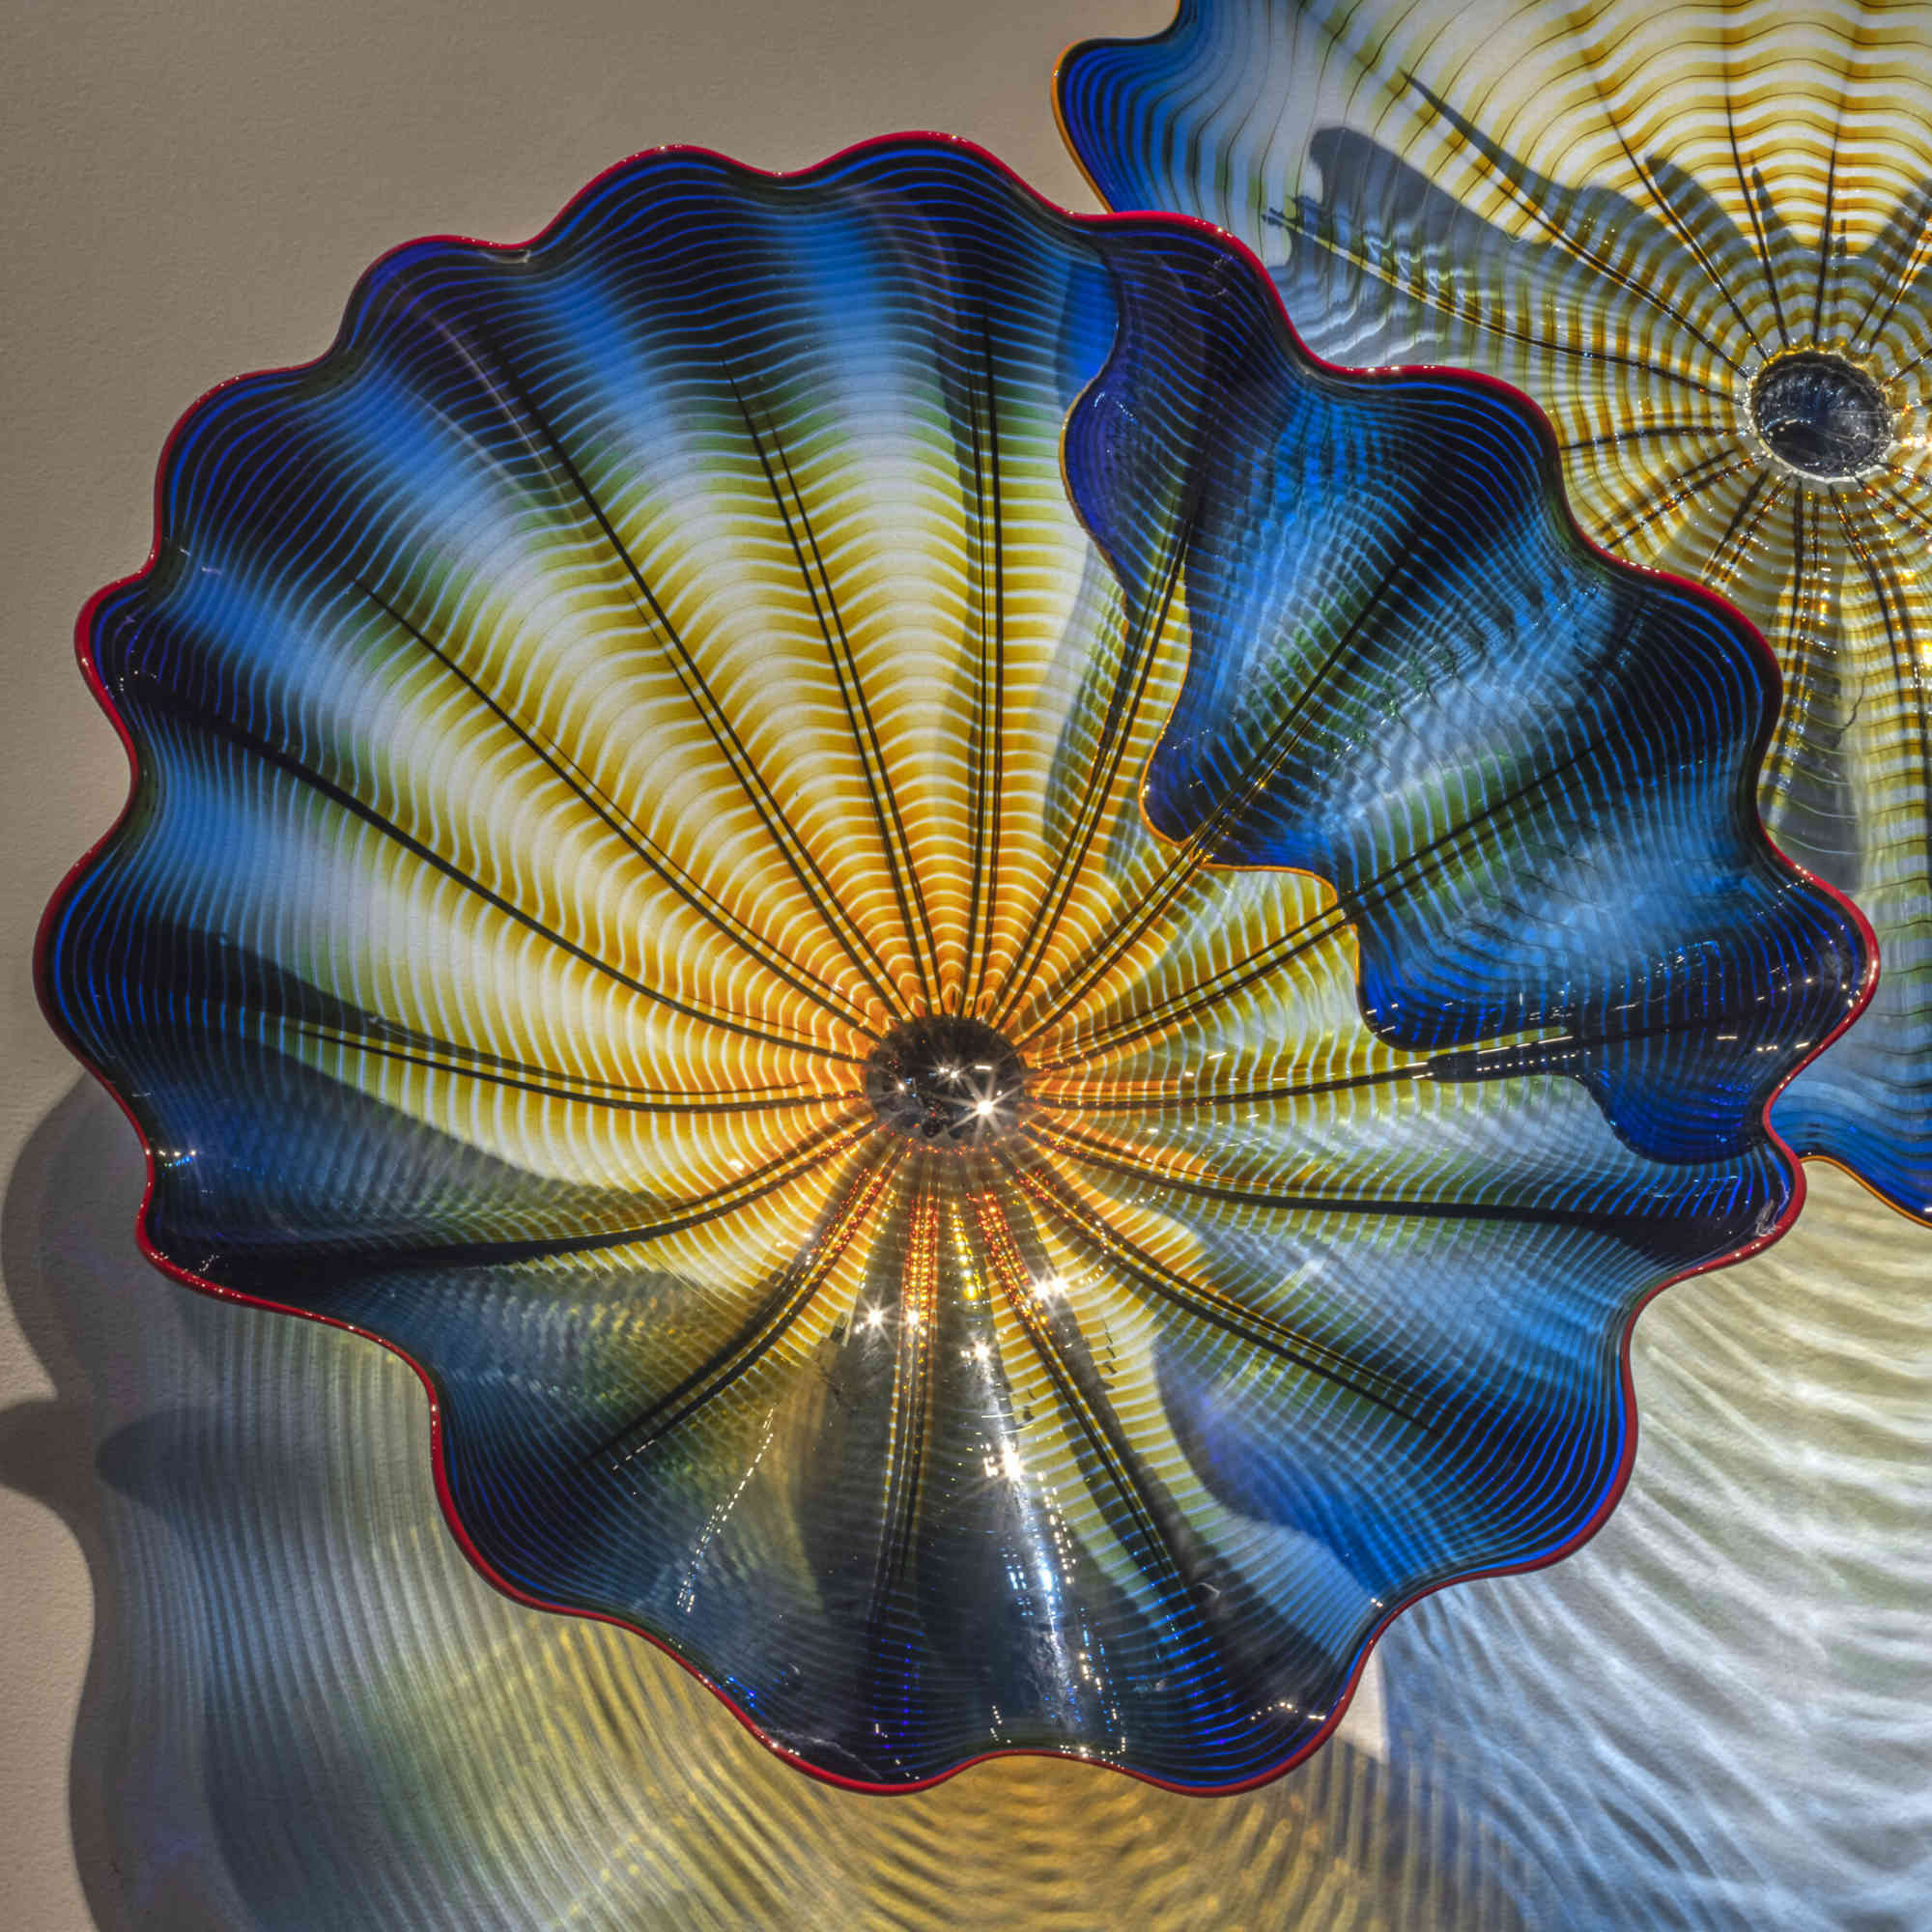 Palmer Museum of Art will unveil installation by Dale Chihuly in new